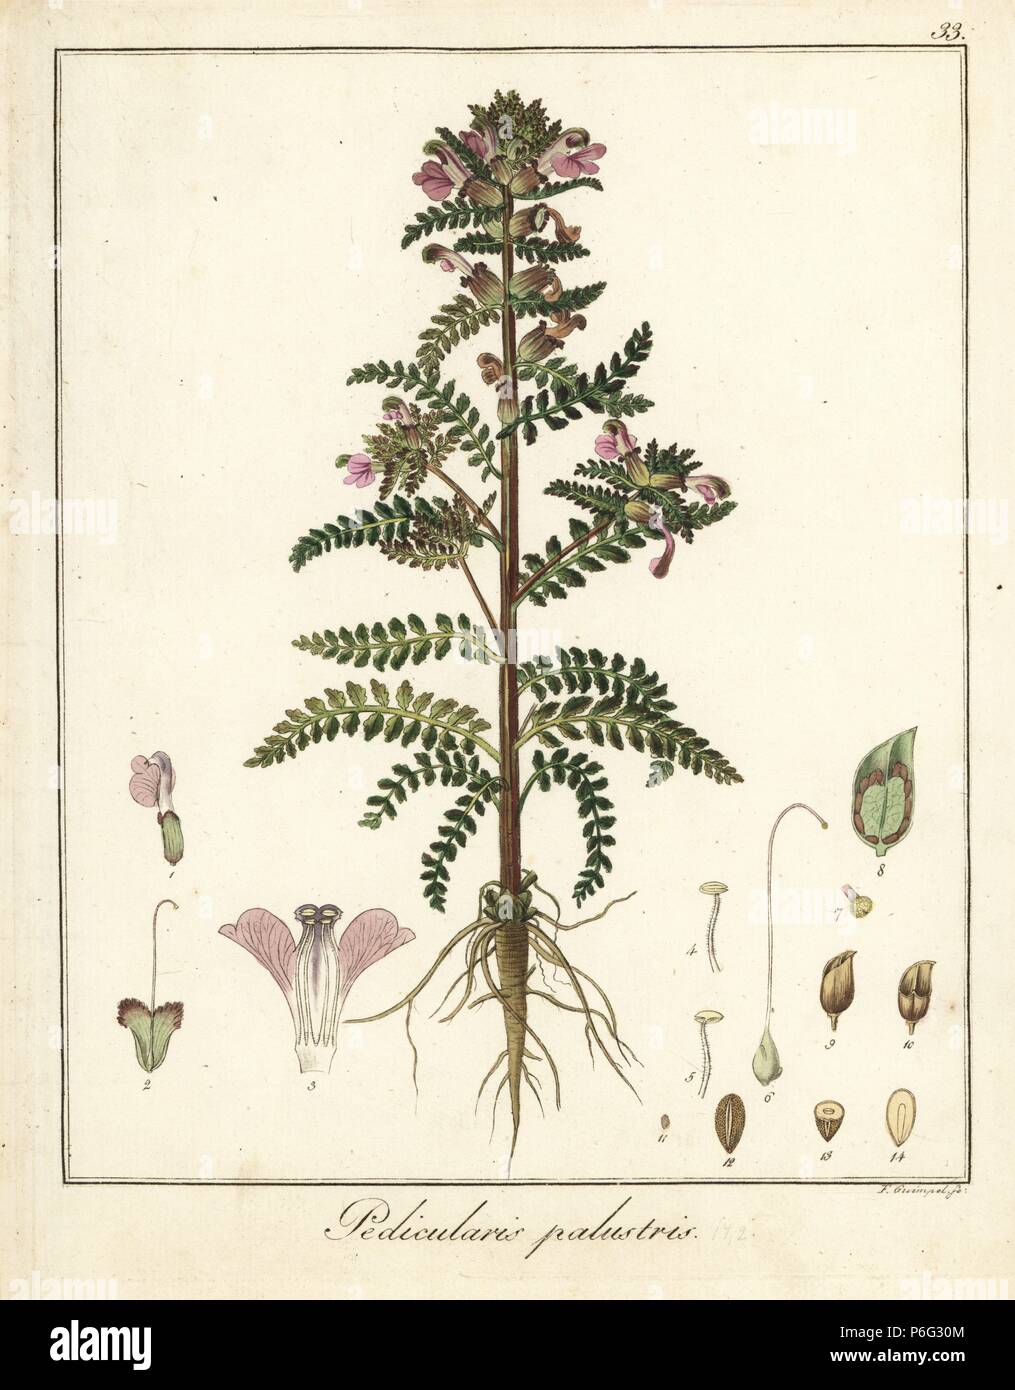 Marsh lousewort, Pedicularis palustris. Handcoloured copperplate engraving by F. Guimpel from Dr. Friedrich Gottlob Hayne's Medical Botany, Berlin, 1822. Hayne (1763-1832) was a German botanist, apothecary and professor of pharmaceutical botany at Berlin University. Stock Photo